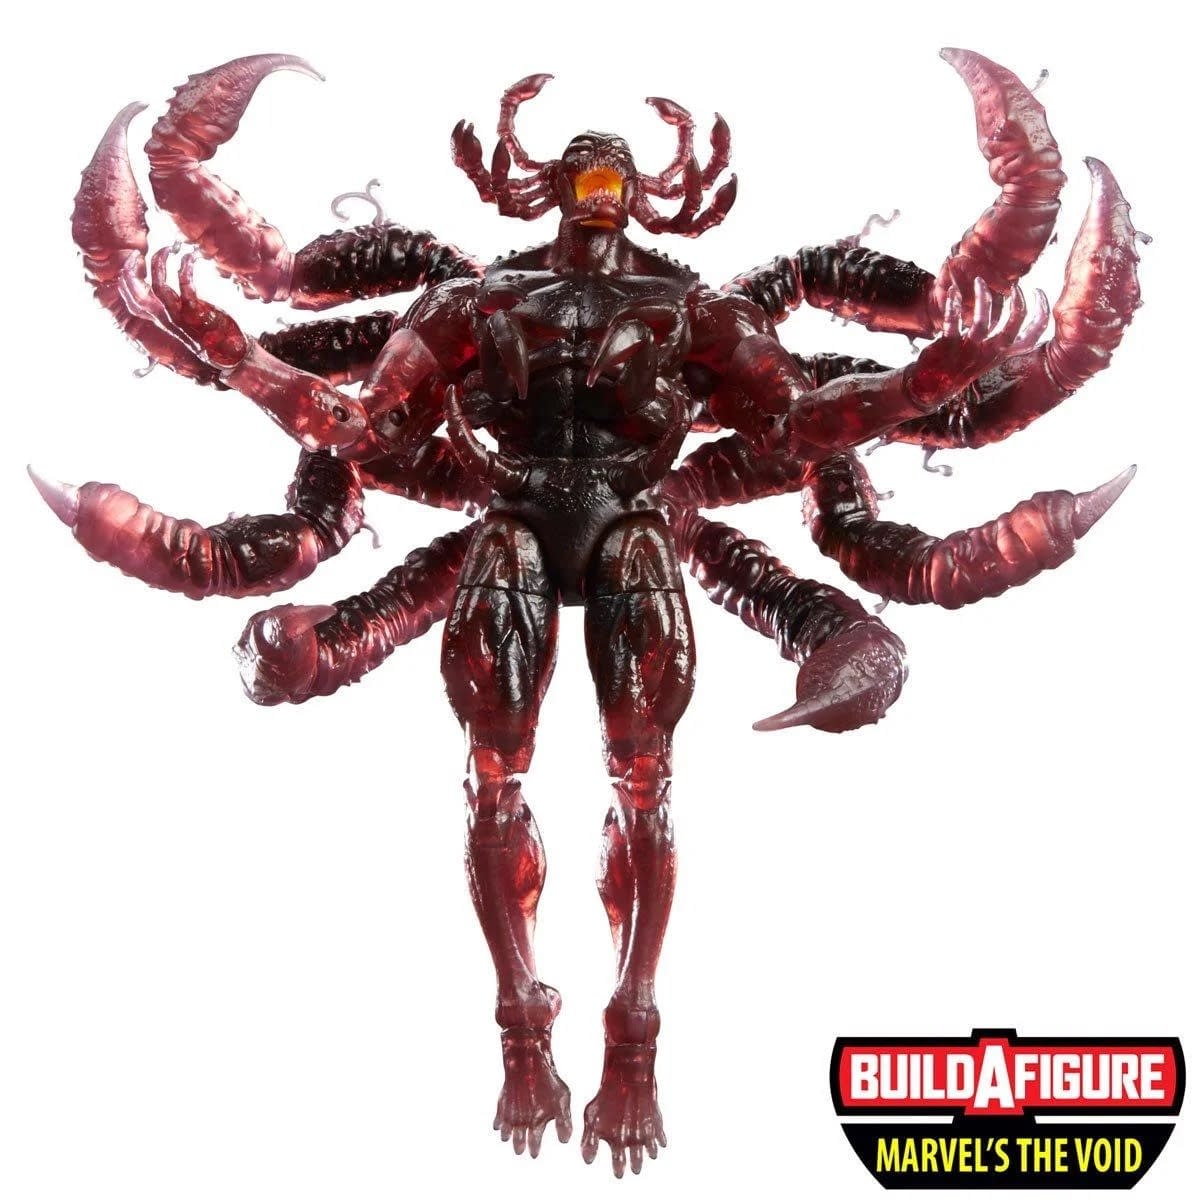 The Void is Coming to Hasbro with New Marvel Legends BAF Wave 